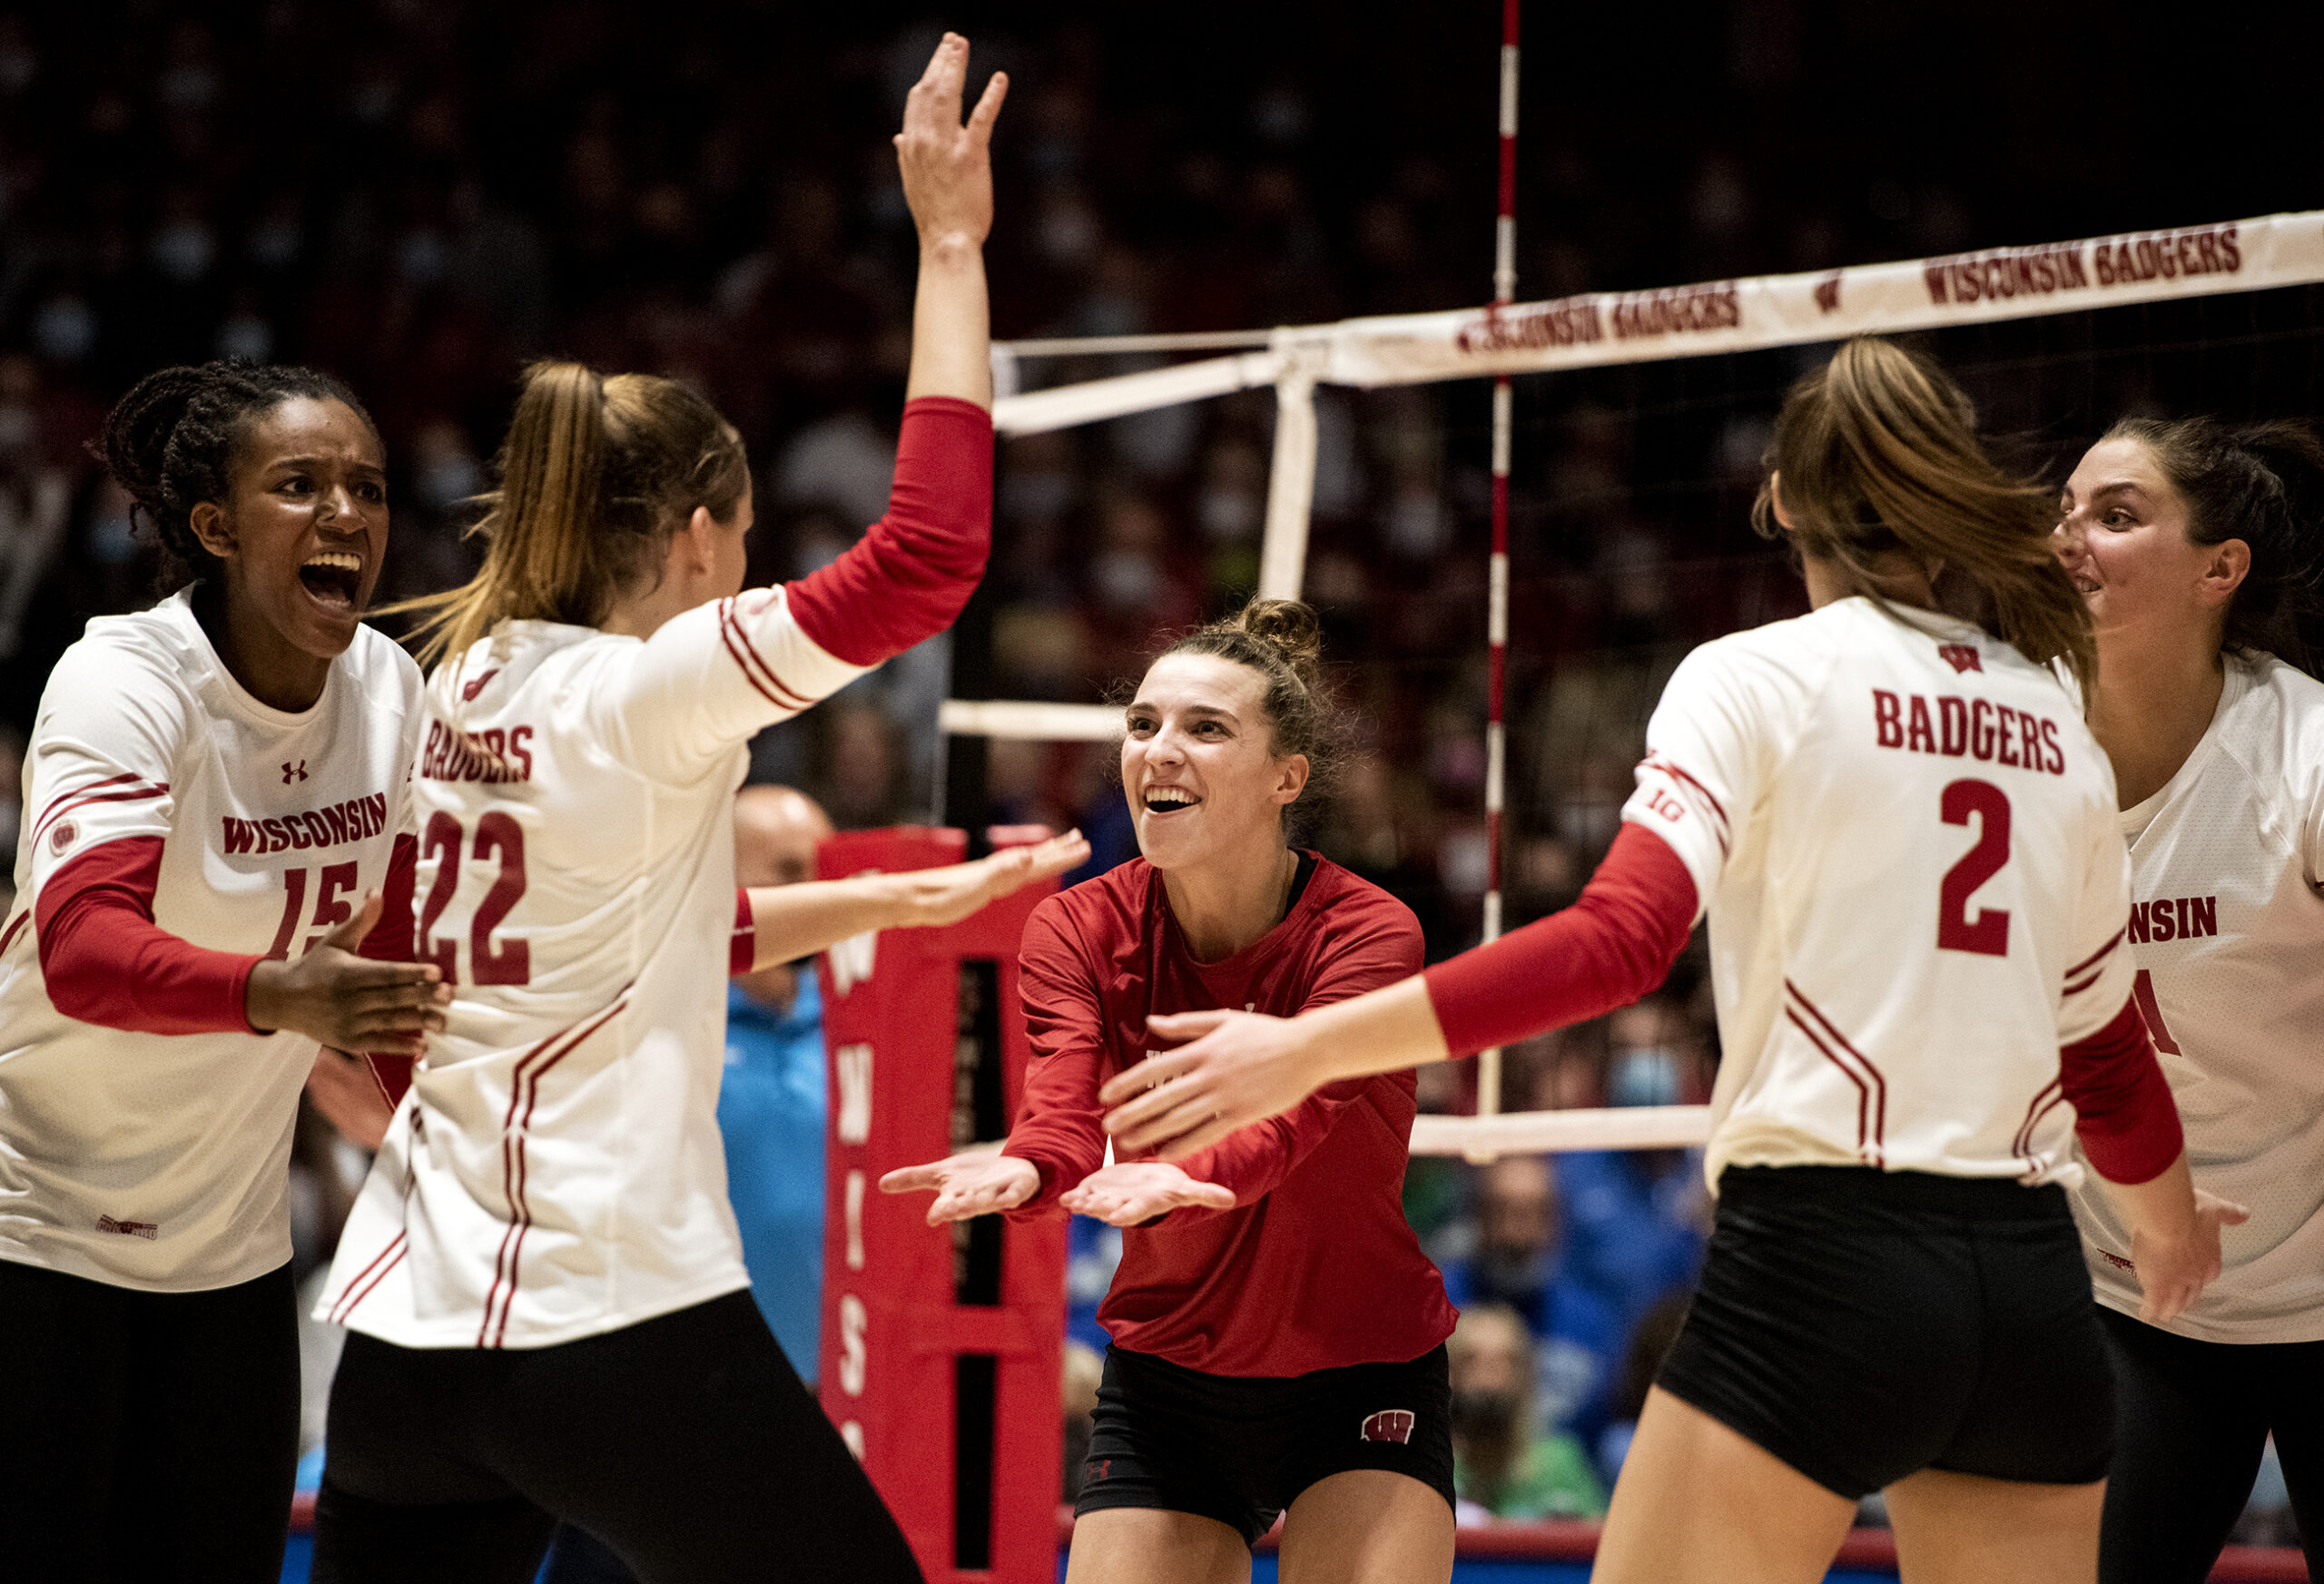 UW-Madison Police Department investigating leaked photos, videos of women’s volleyball team